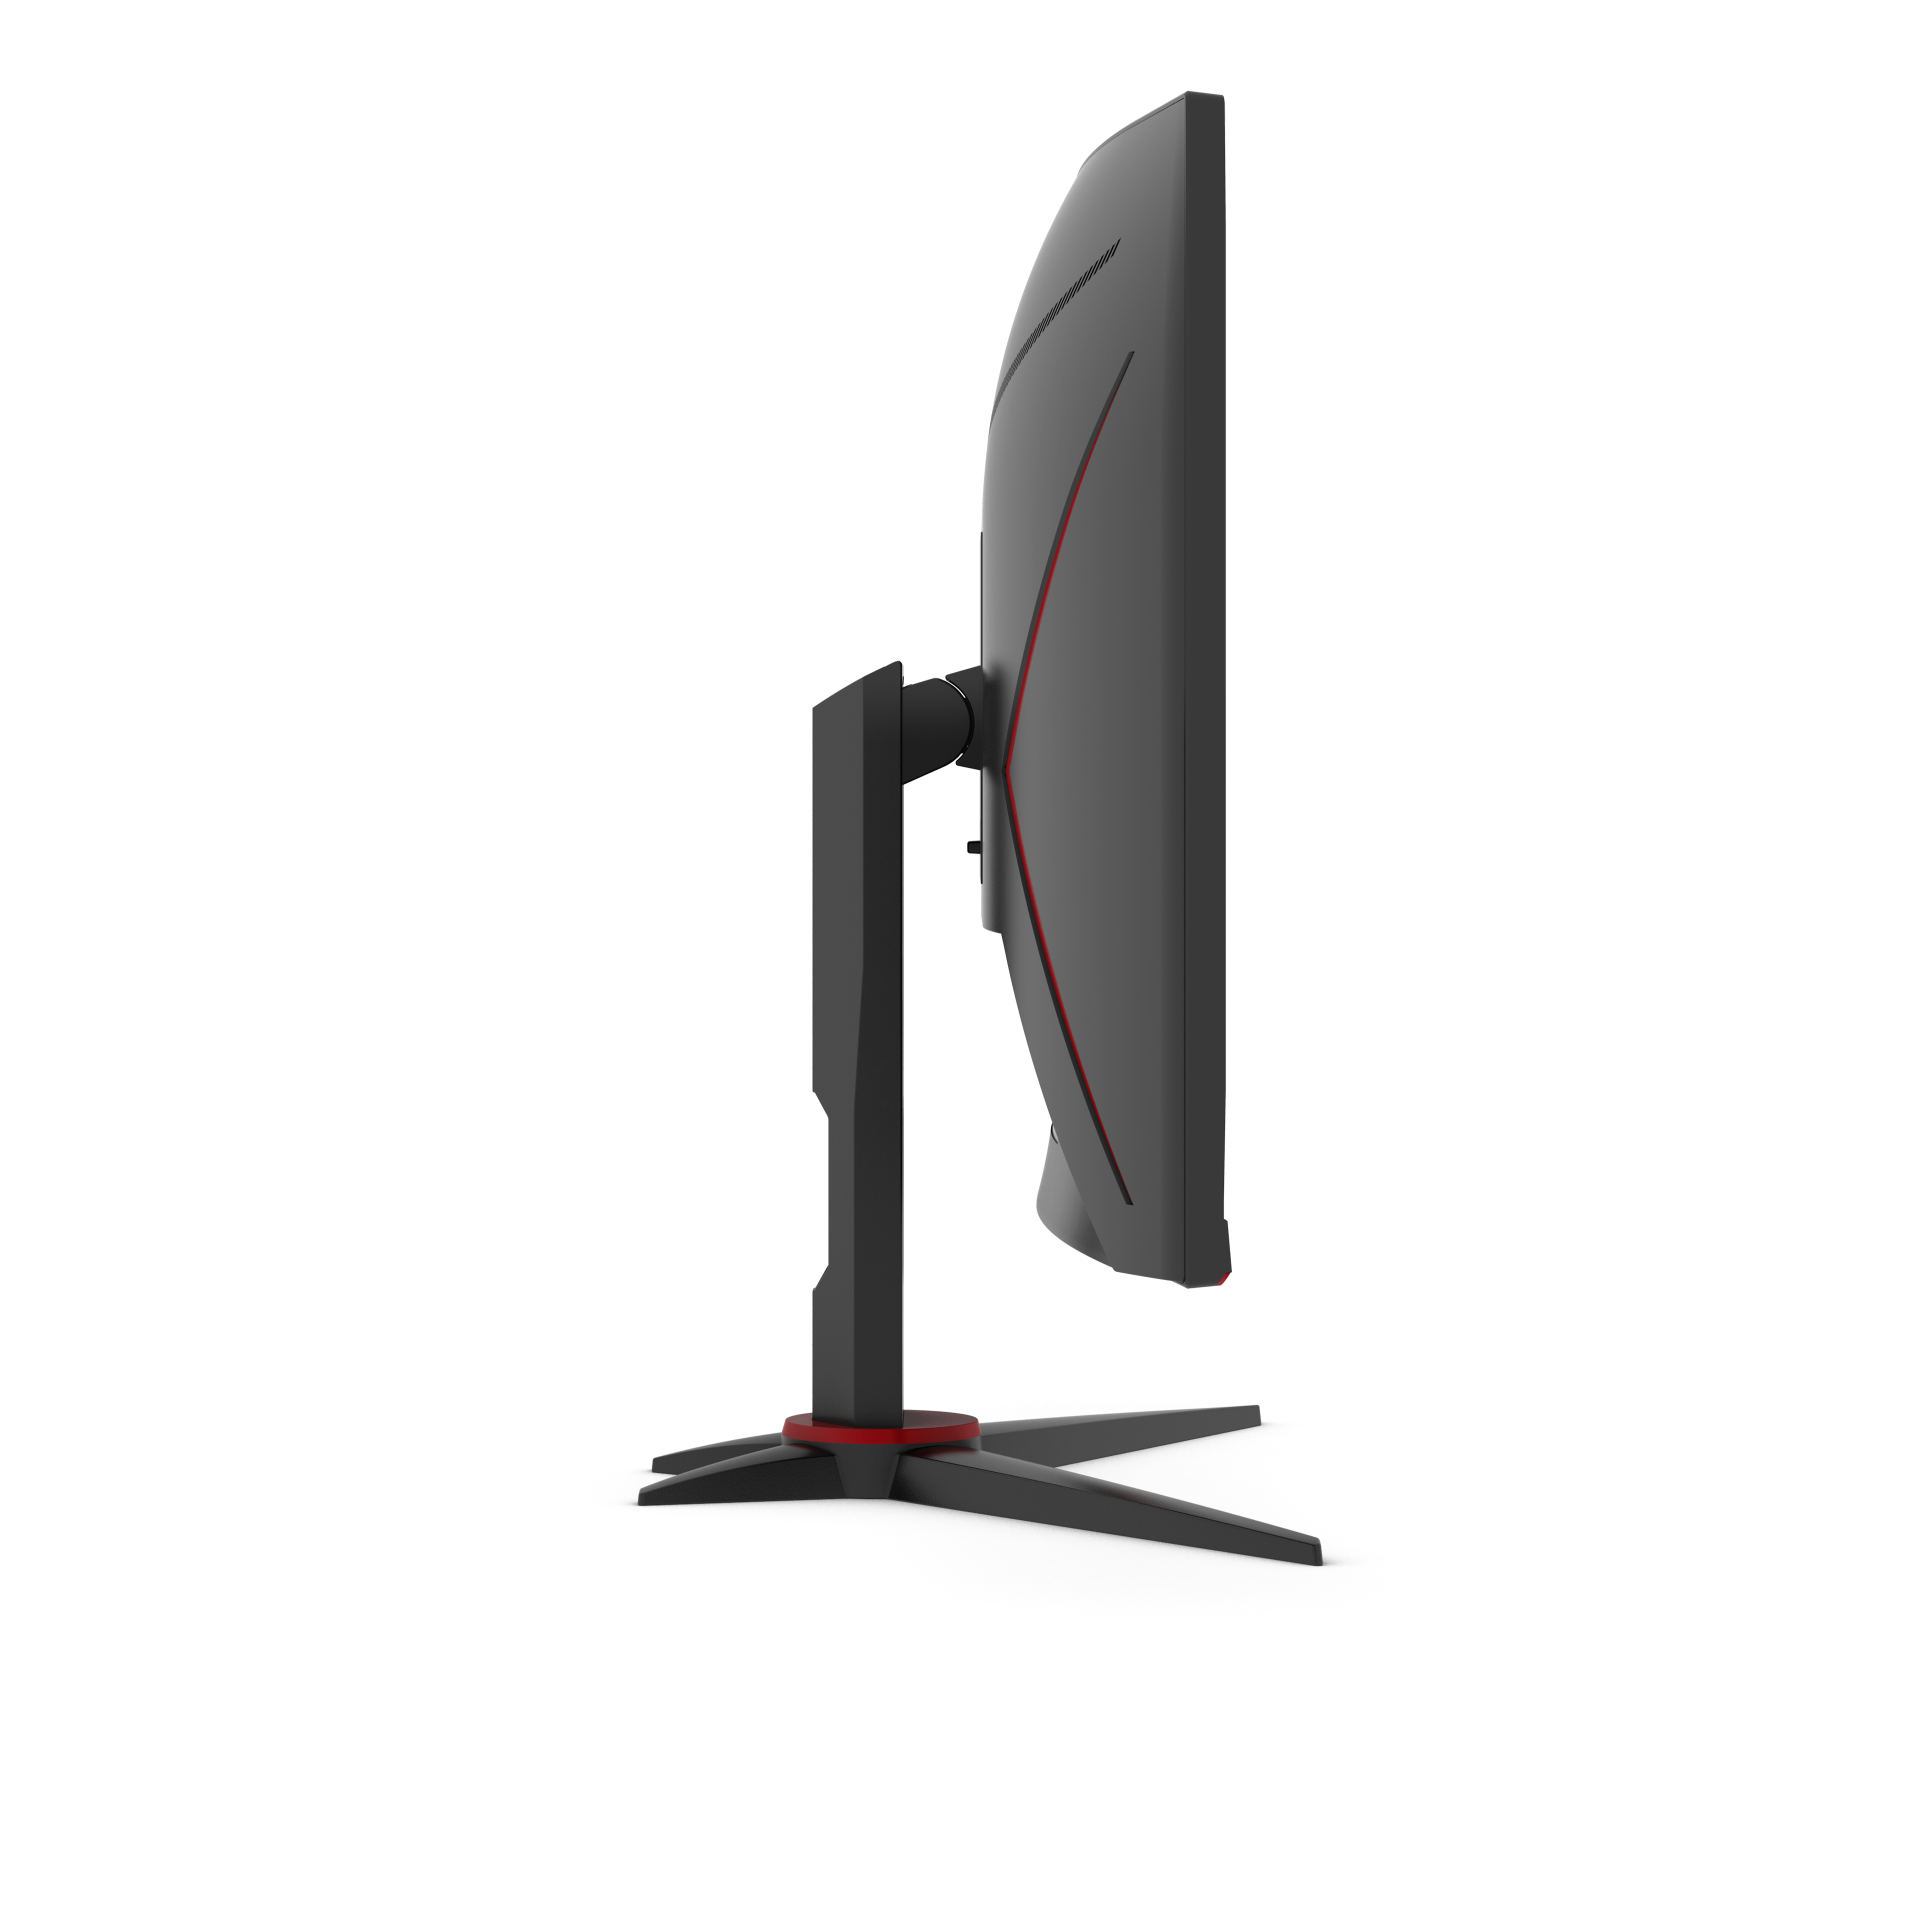 Monitor 27" AOC Gaming Curved FHD 240Hz 1ms - Albagame